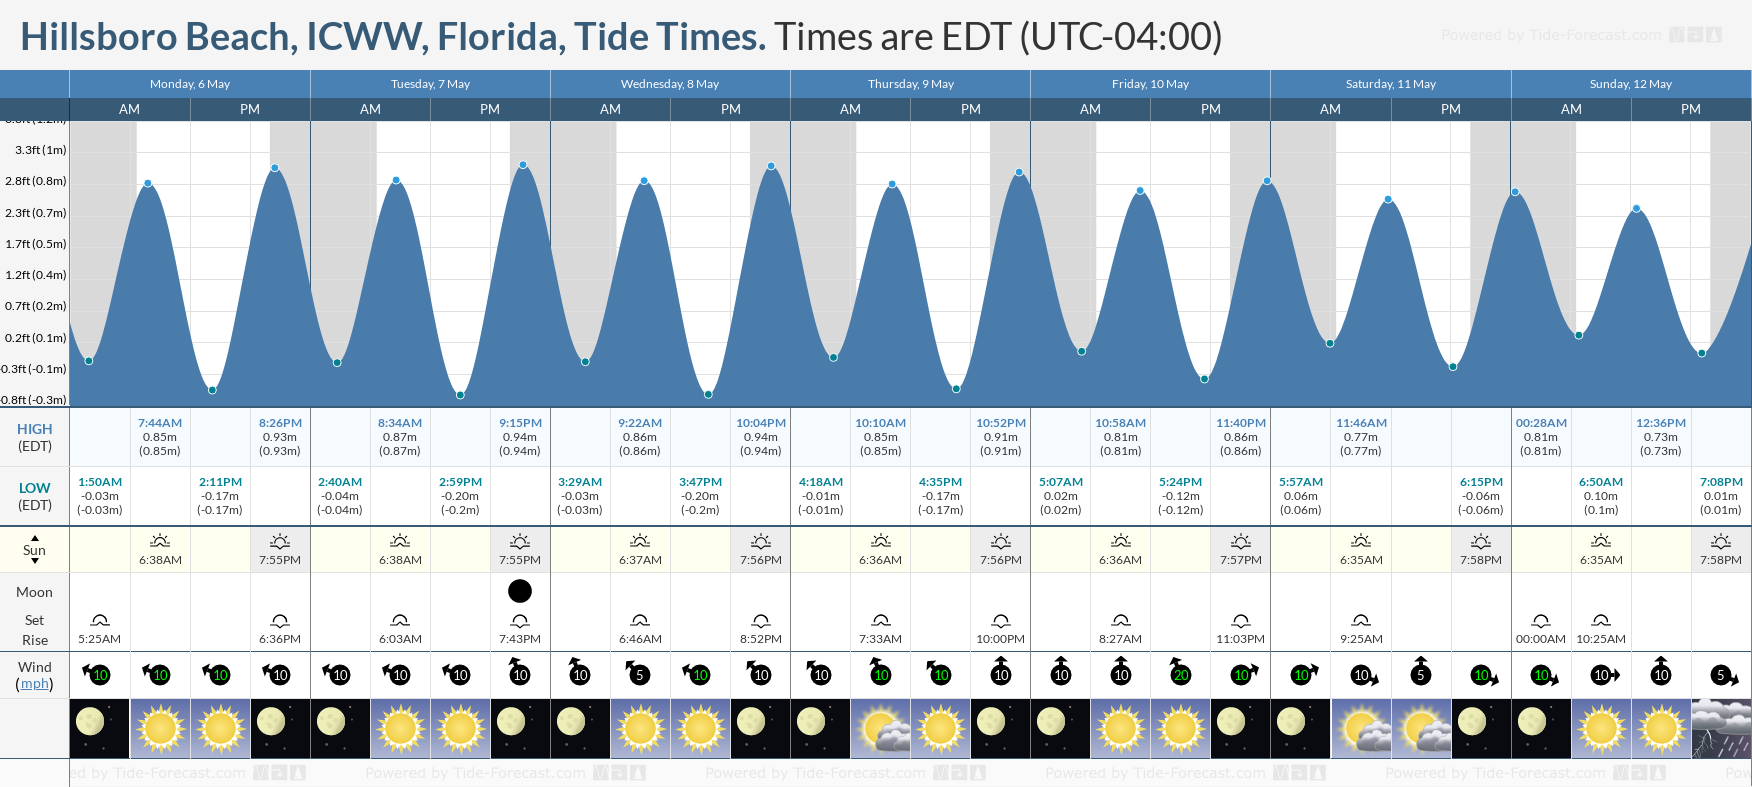 Hillsboro Beach, ICWW, Florida Tide Chart including high and low tide tide times for the next 7 days